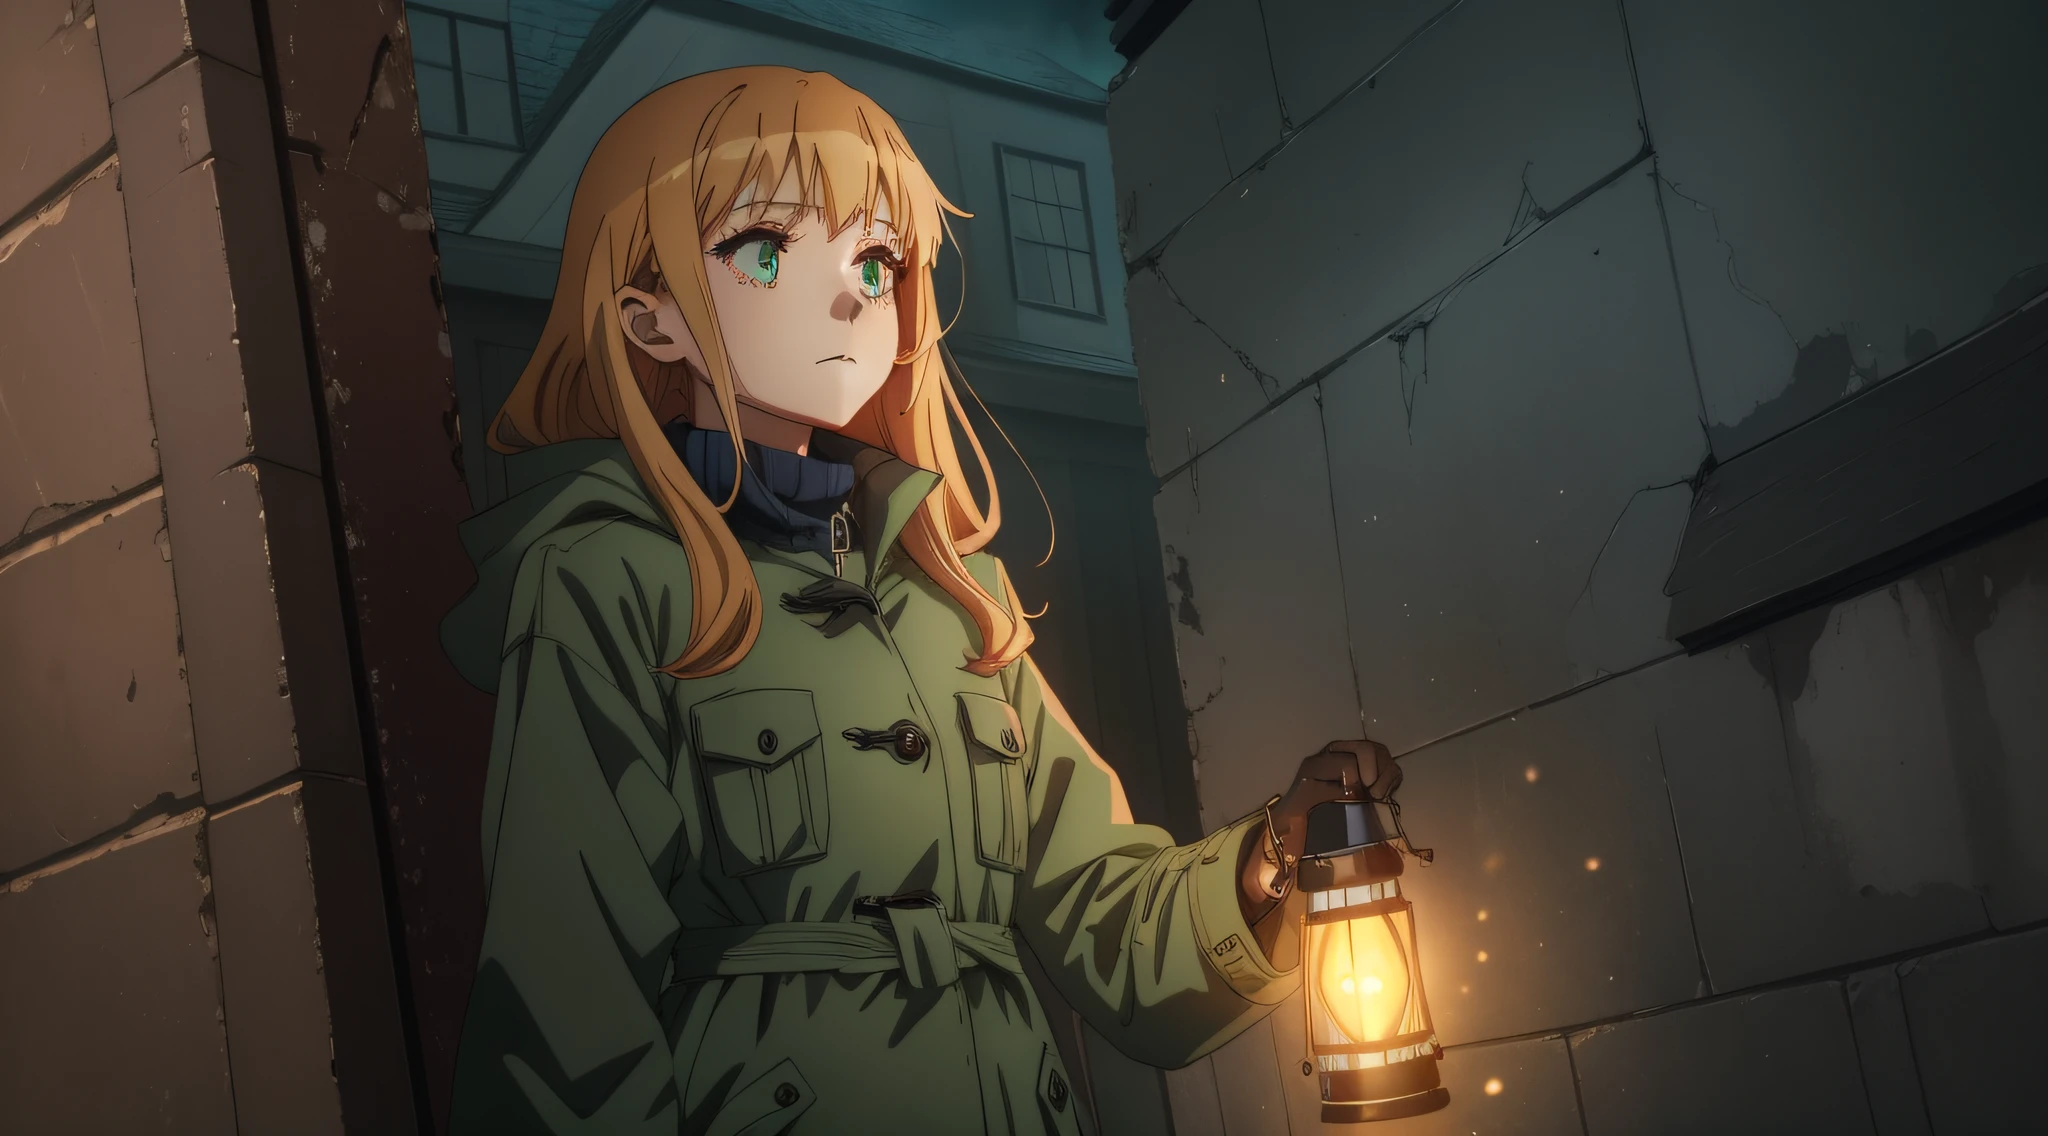 A beautiful woman with a coat enters a haunted house holding a flashlight at night, 2.5d anime style